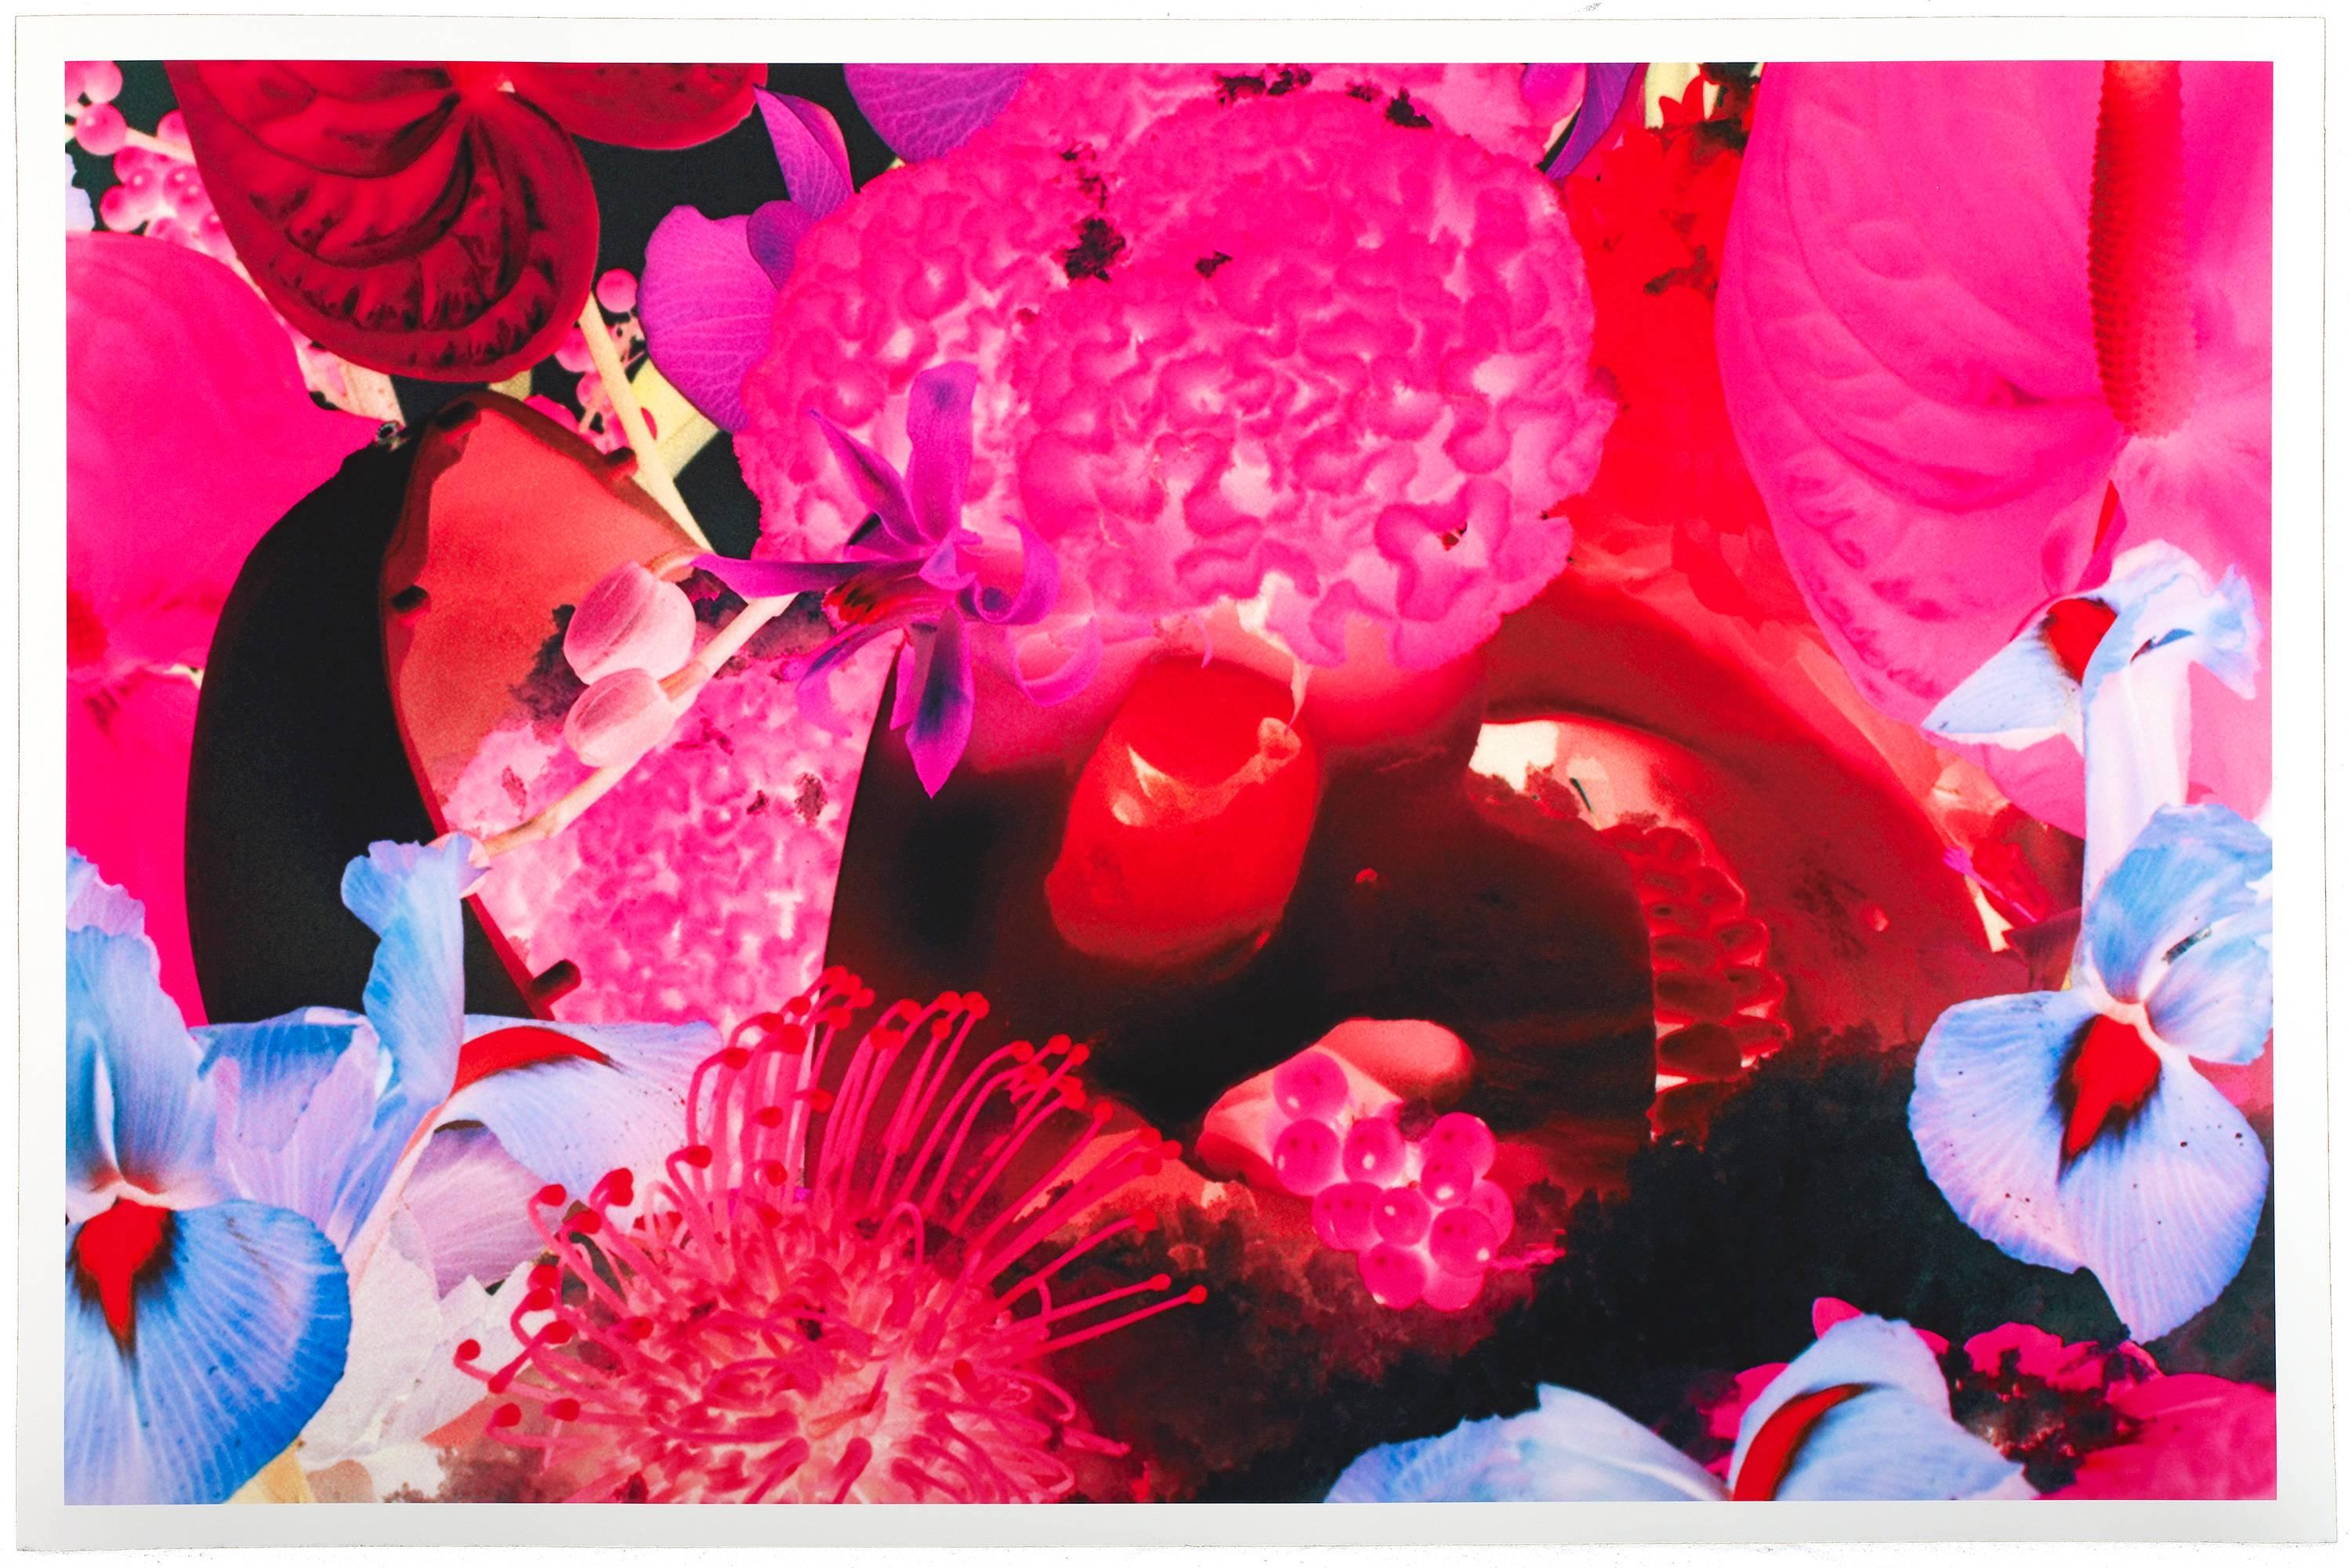 At the Far Edges of the Universe IV - Print by Marc Quinn